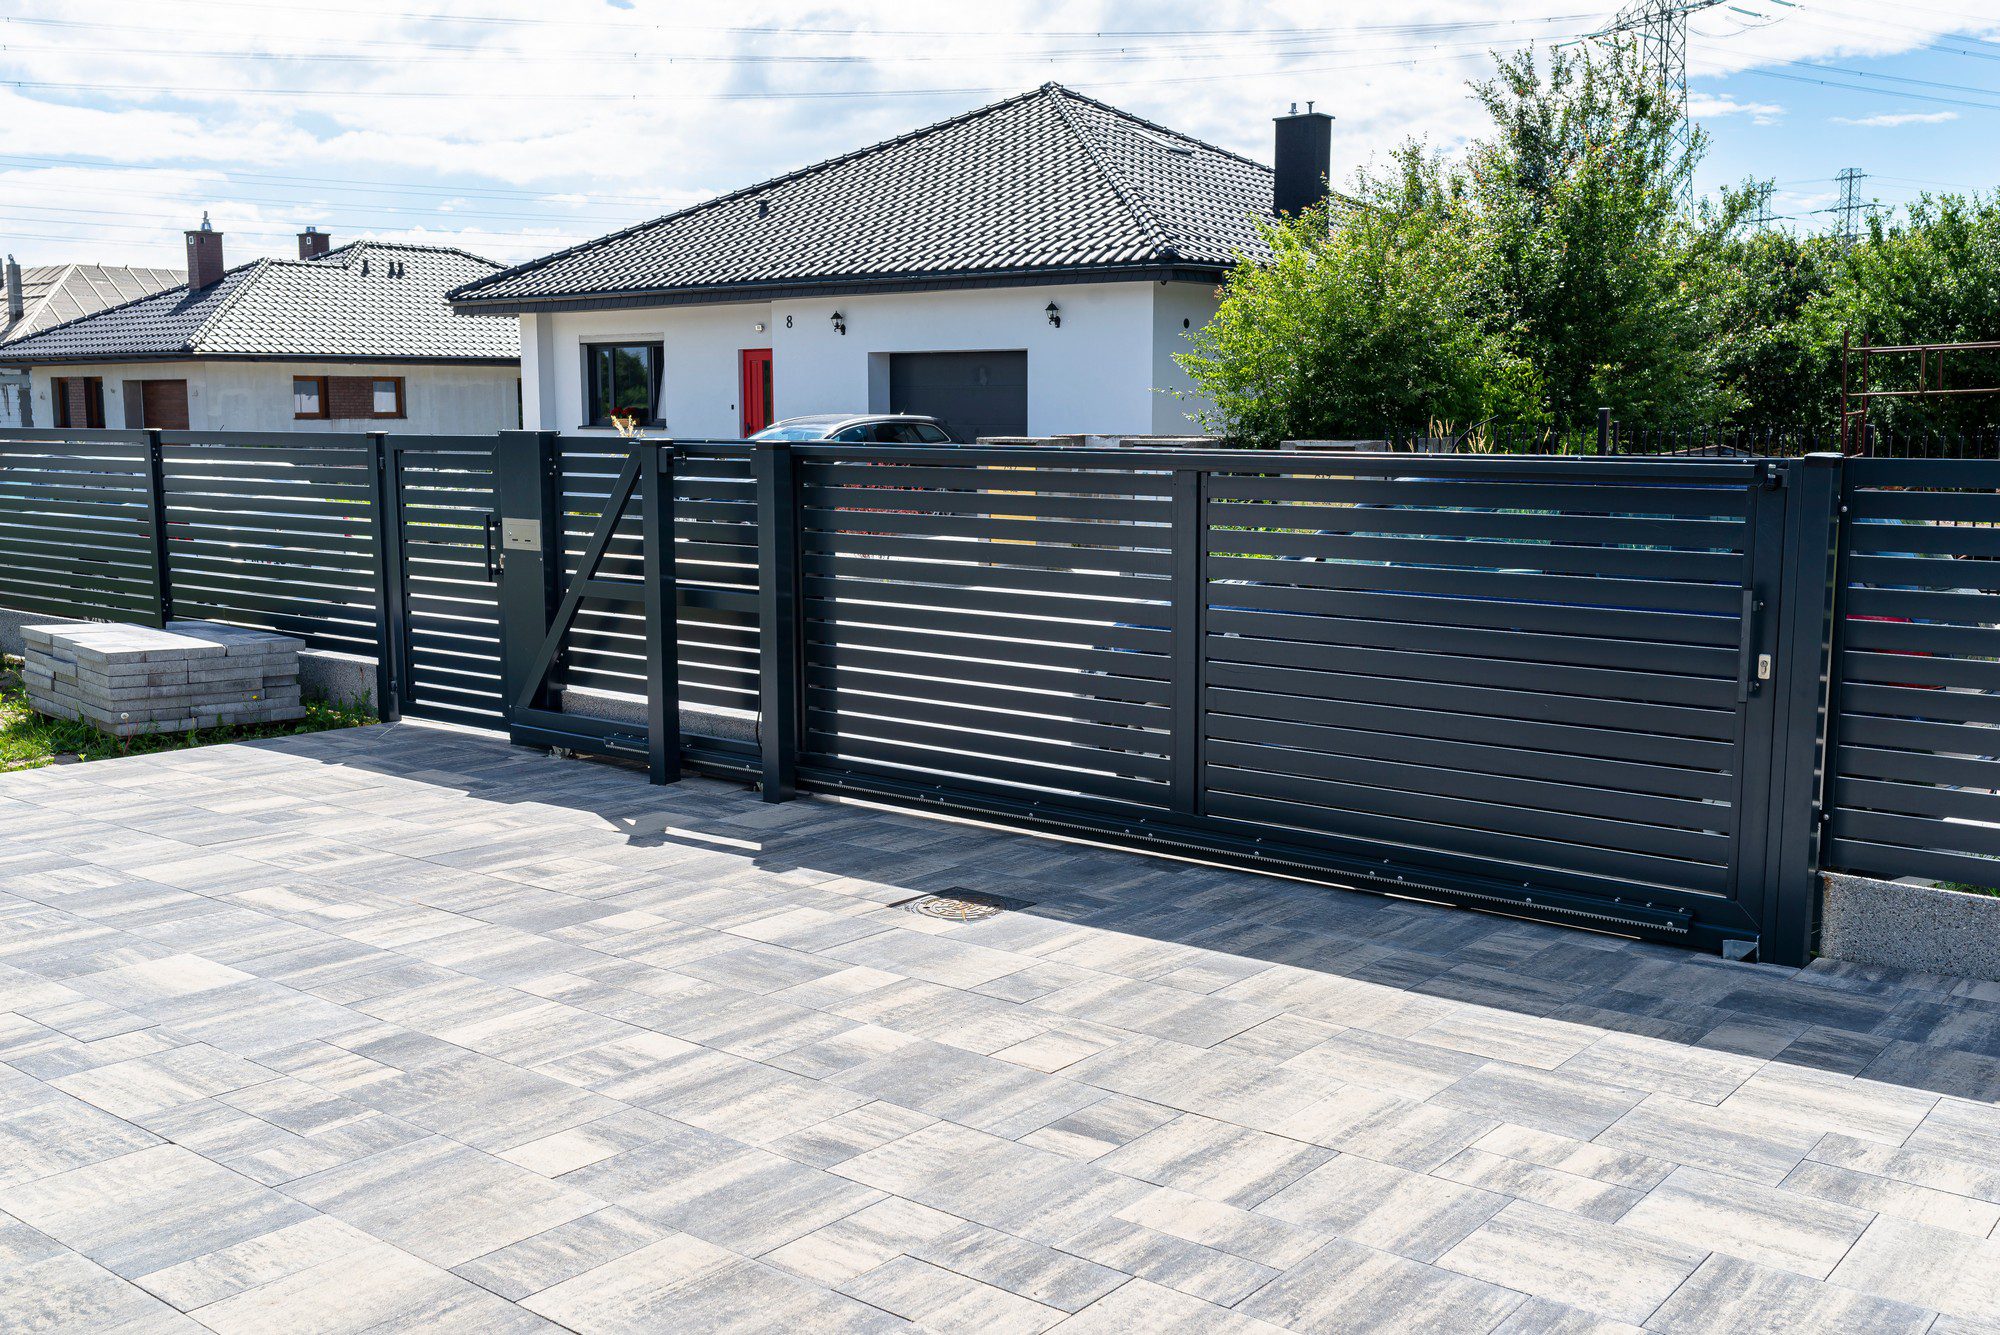 This image shows a modern residential setting featuring a stylish black metal fence with horizontal slats, providing privacy while also allowing some light and air through. There is a gate integrated into the fence, and it appears to be a sliding type given the track on the ground. The pavement in the foreground is made of rectangular paving stones laid in a repeating pattern. In the background, we can see the facade of a single-story house with a red door and dark tiled roof, which complements the contemporary aesthetic of the fence. There are also some green bushes and a clear blue sky, suggesting a pleasant, suburban environment.